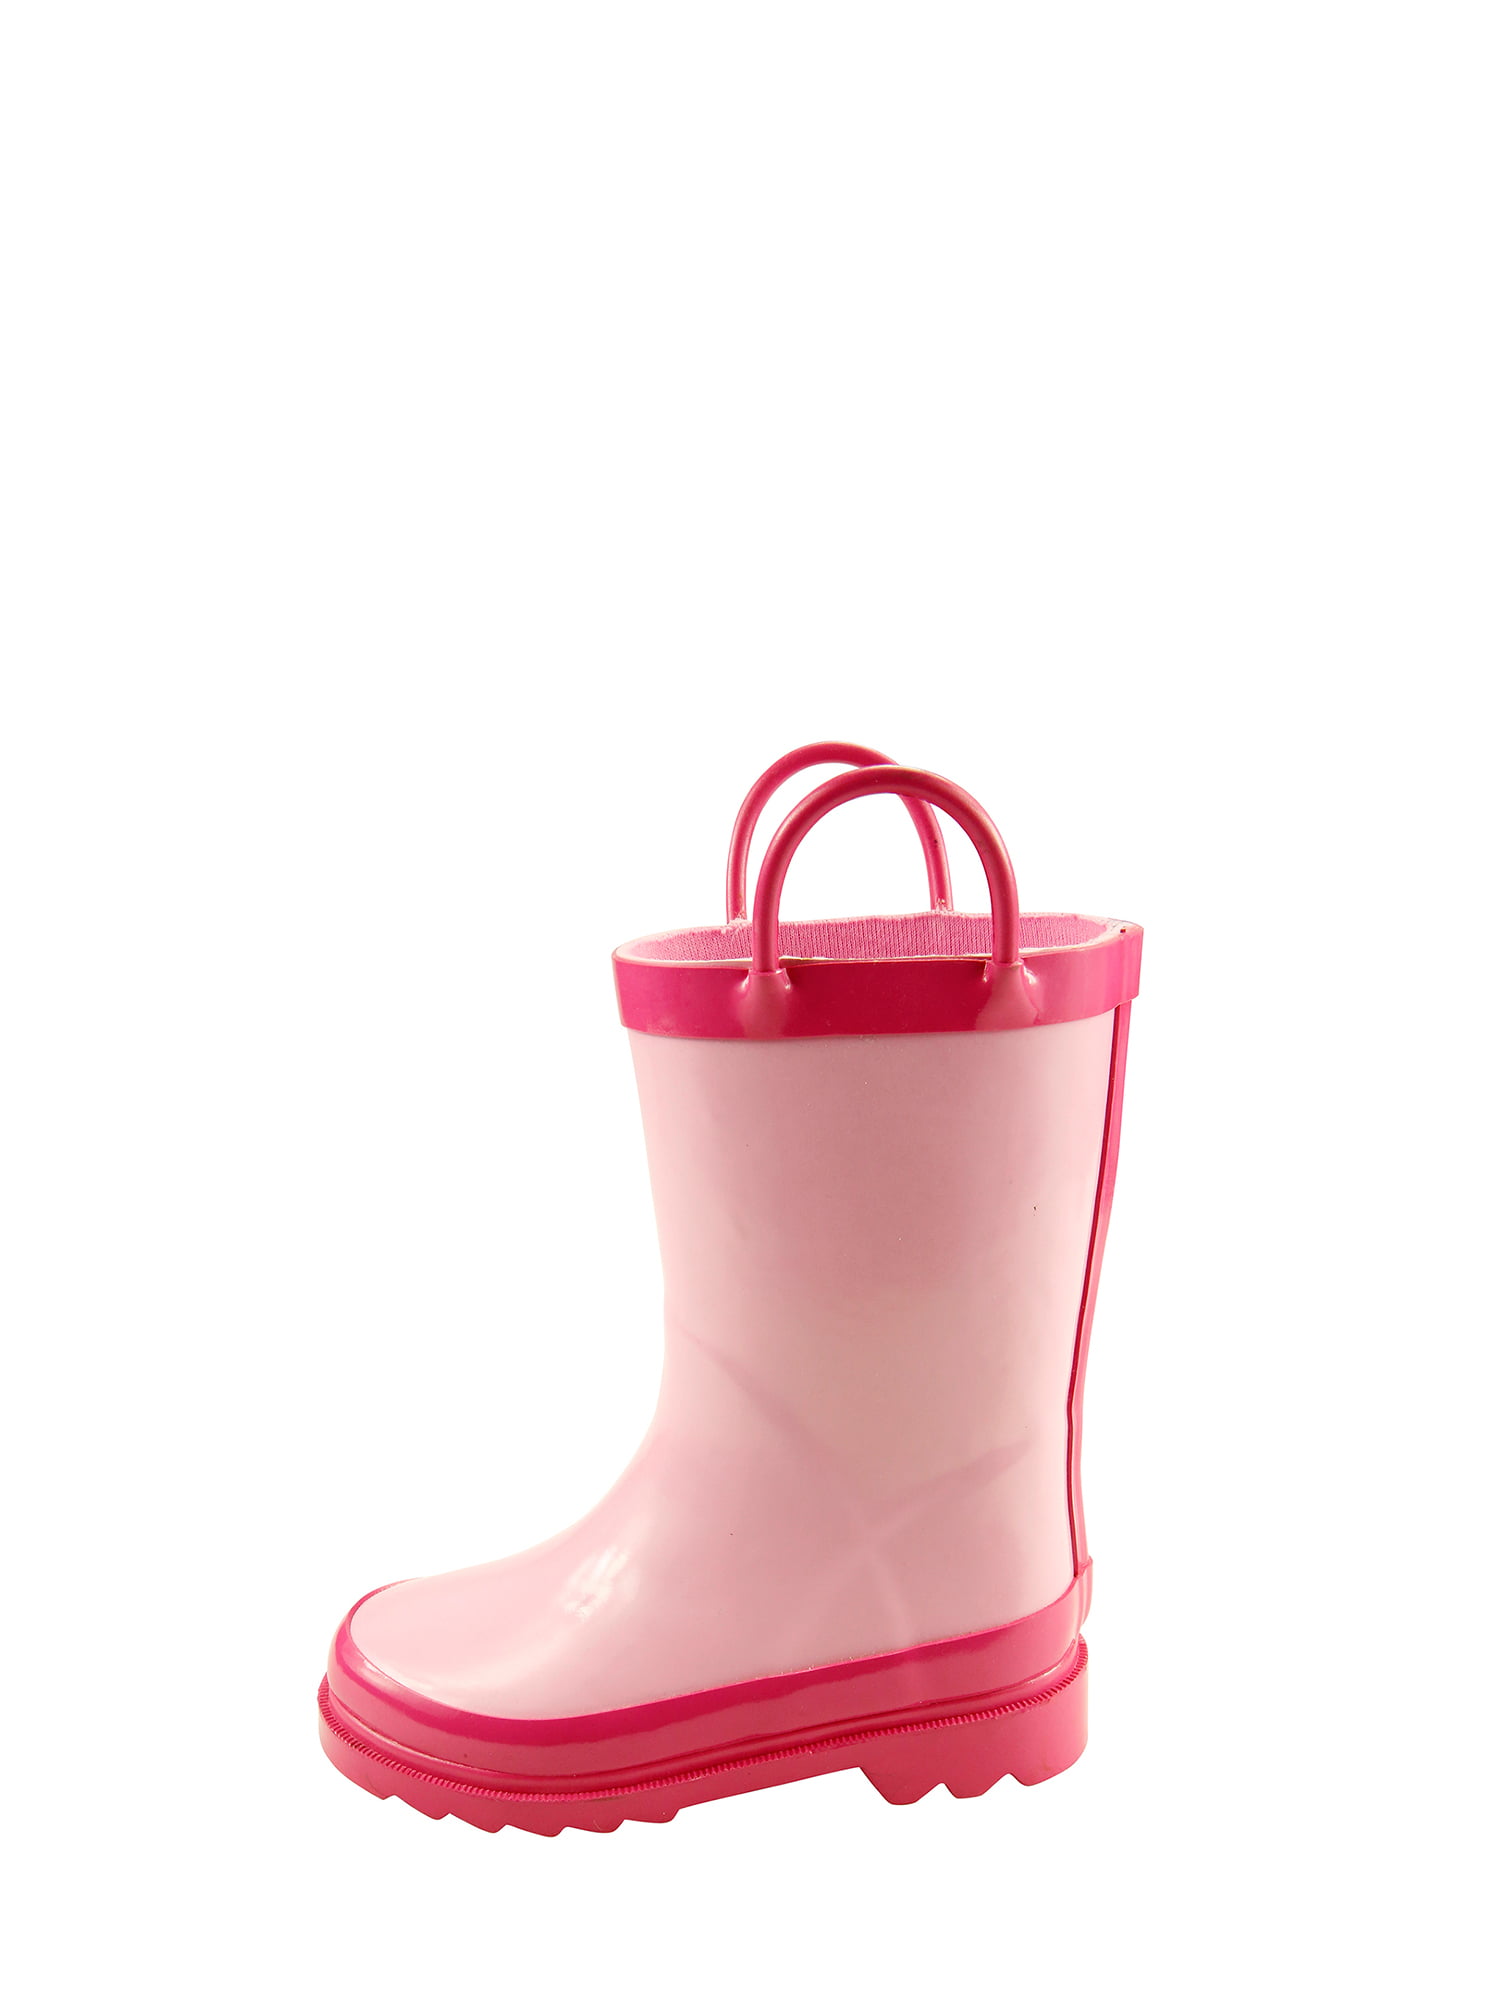 Kids Boys Girls Printed Pull Loops Wellies Shoes Boots 